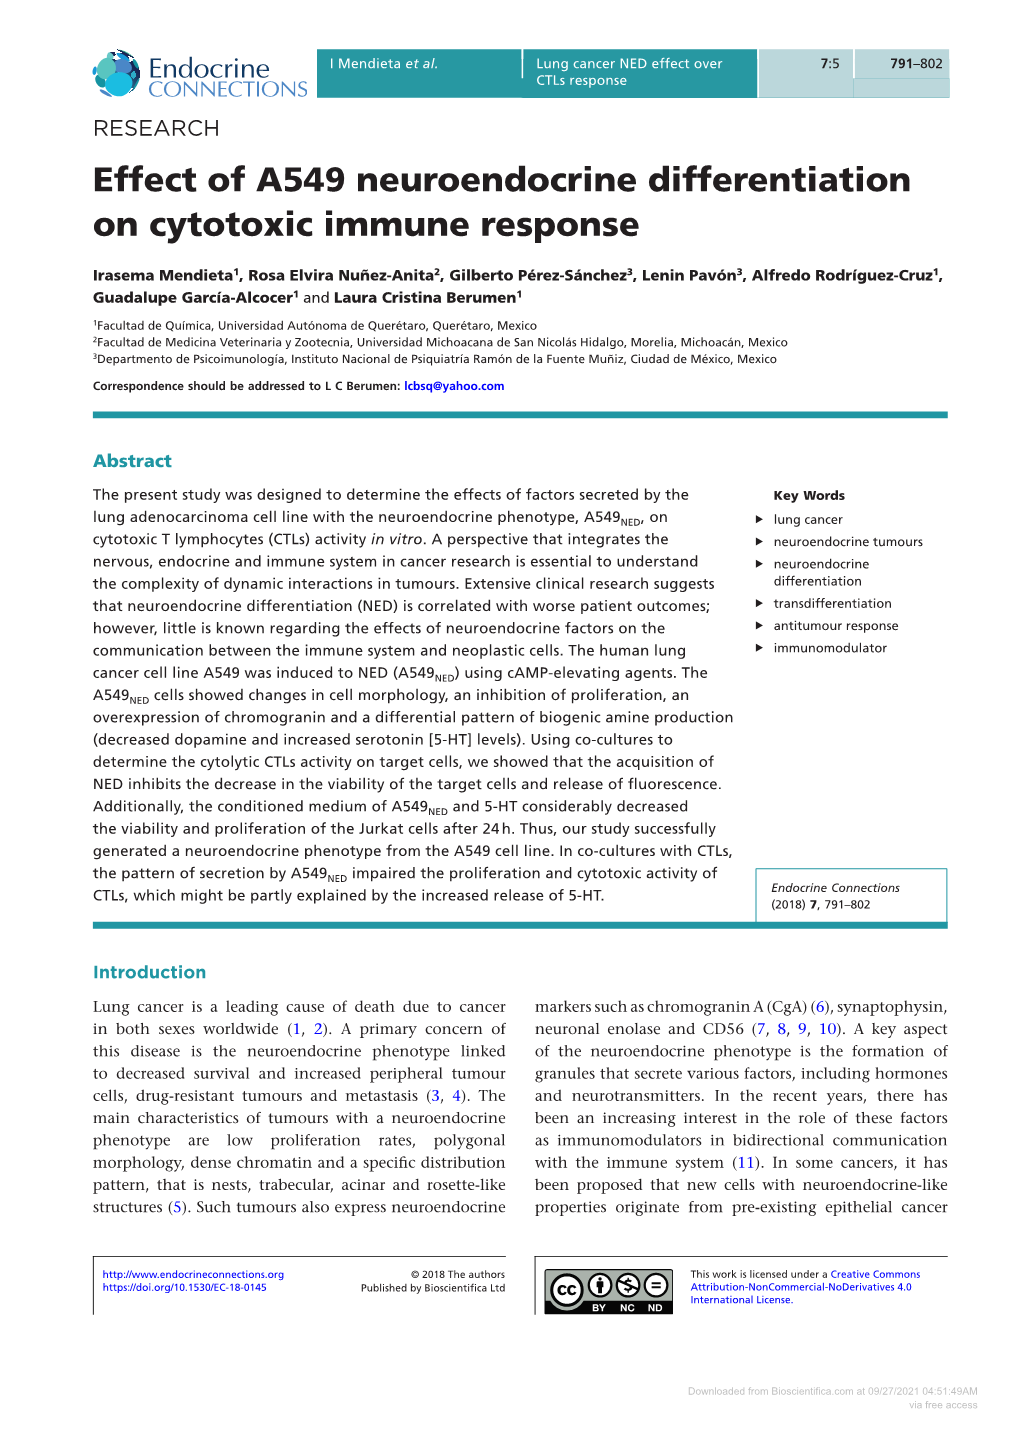 Effect of A549 Neuroendocrine Differentiation on Cytotoxic Immune Response